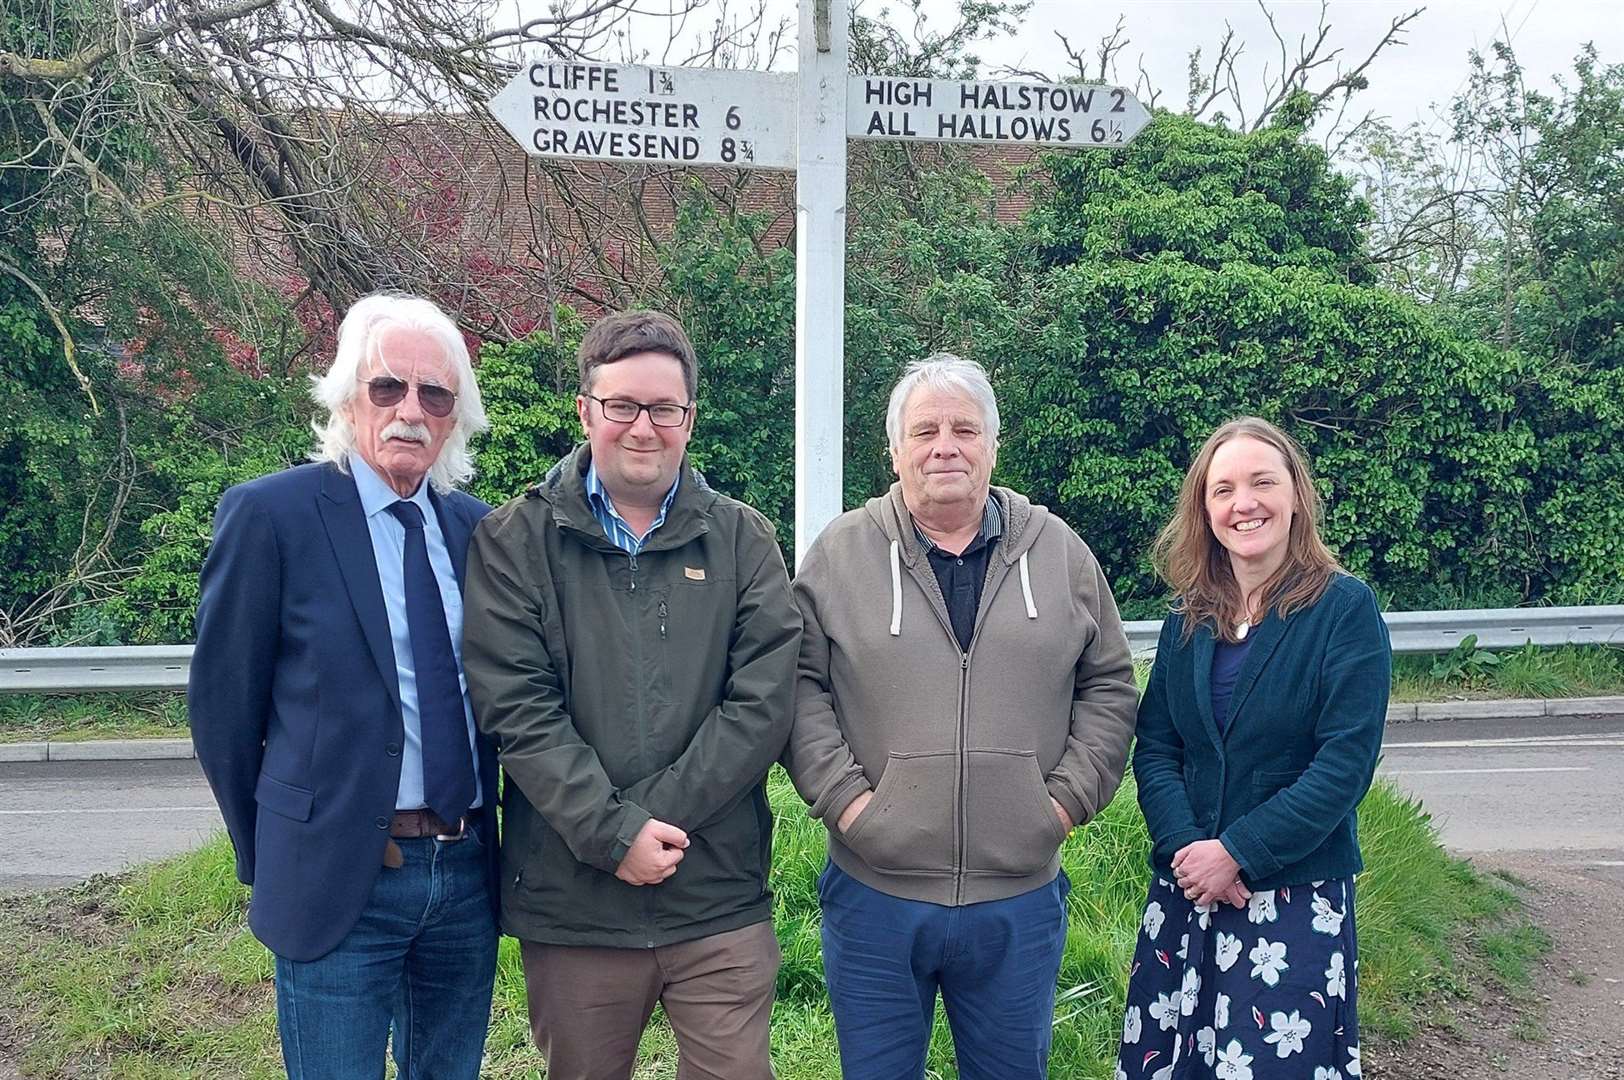 By being a formal group, The Independent Group is entitled to sit on Medway Council committees. From left, Cllrs George Crozer, Michael Pearce, Ron Sands, and Elizabeth Turpin.